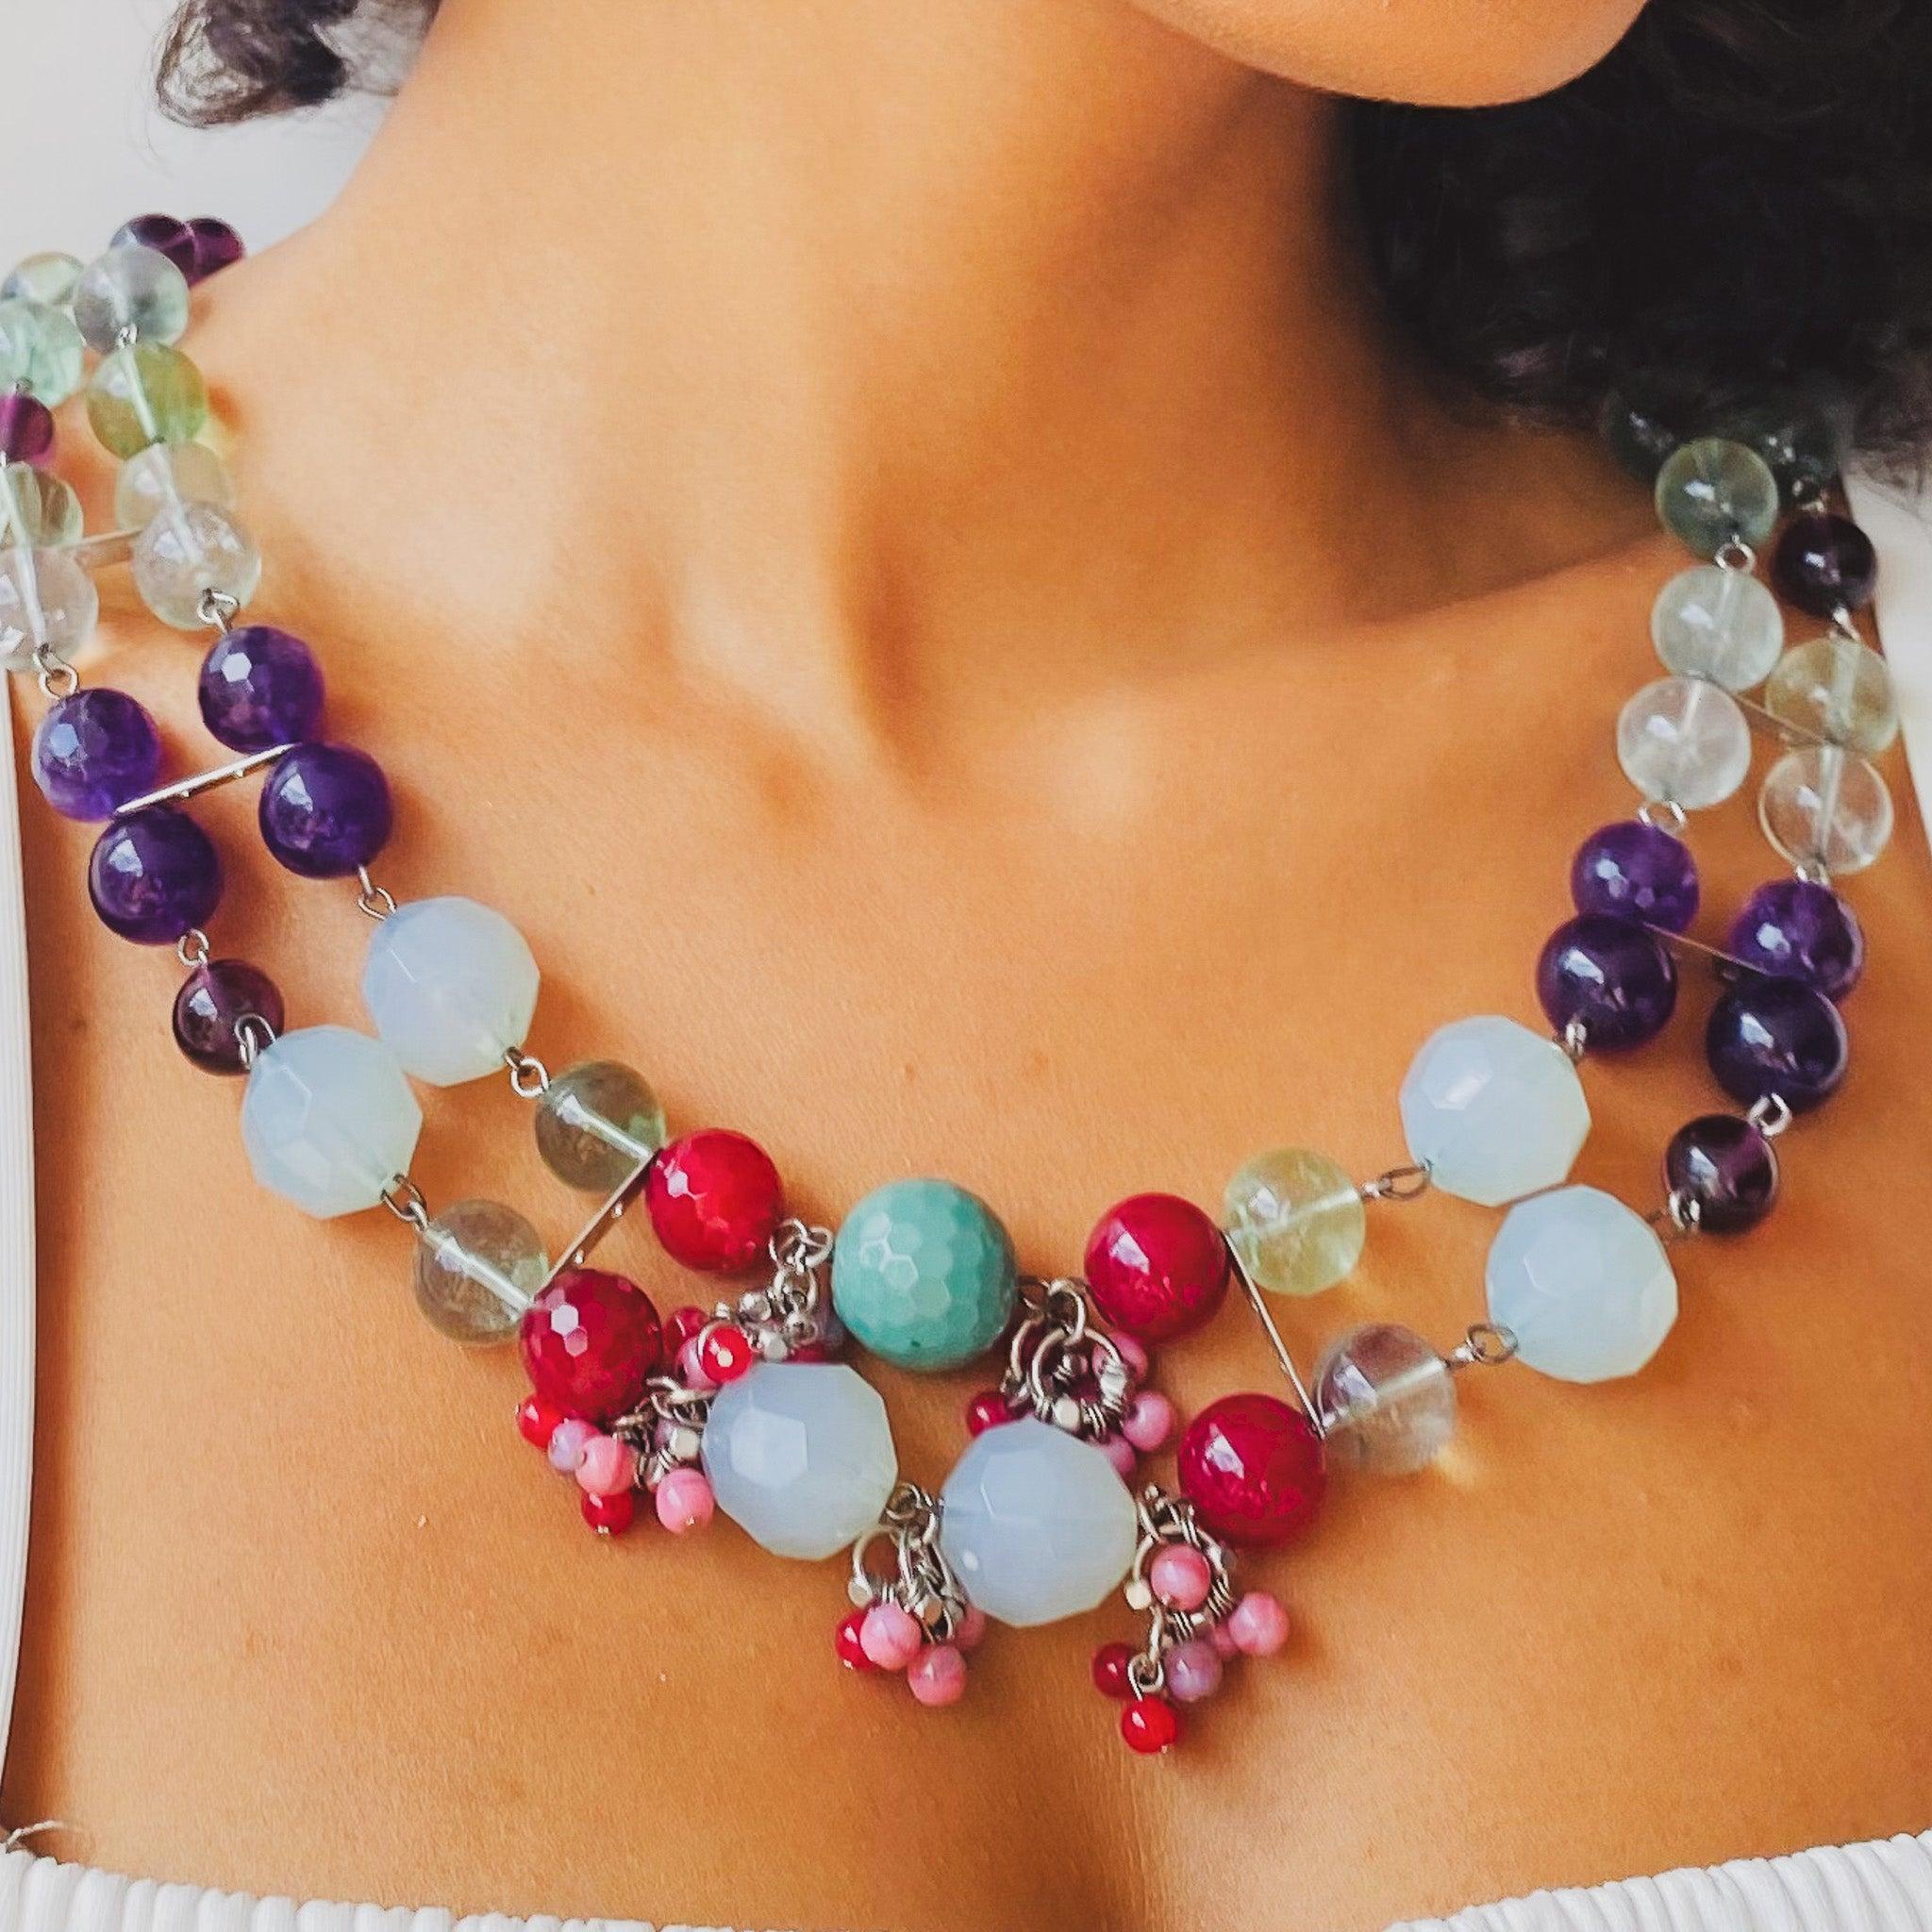 Re-engineered Vintage Beaded Necklace, 1980s

Beautiful vintage Venetian glass beads rescued from a neglected necklace and transformed into this incredible statement piece!

We have a no-waste policy when it comes to vintage jewellery. From broken